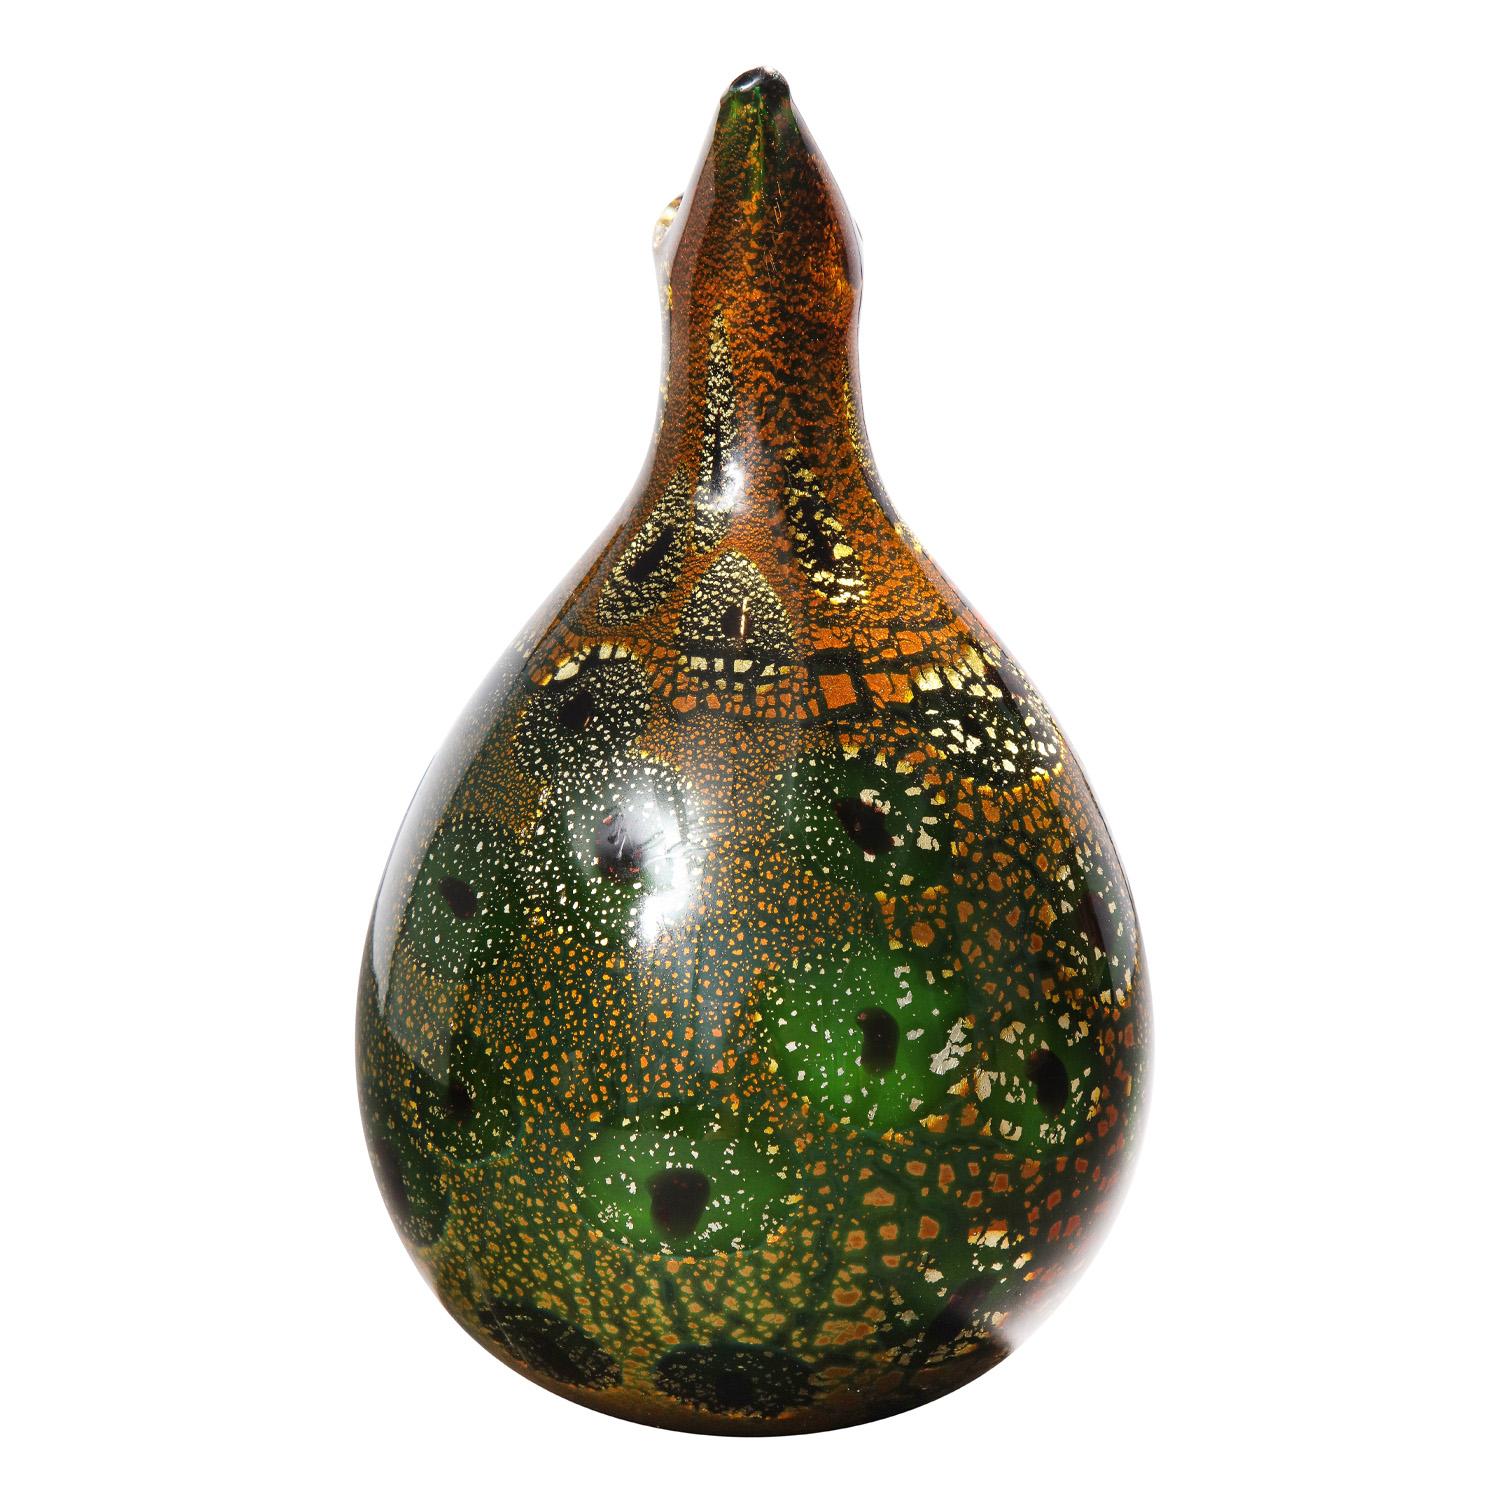 Hand-blown green glass vase model 80 with gold foil and murrhines, from the Reazione Policrome Series, A perle (or Leopoardo) by Giulio Radi for Arte Vetraria Muranese or A.V.E.M., Murano Italy, ca 1950. These rare pieces are like jewels.